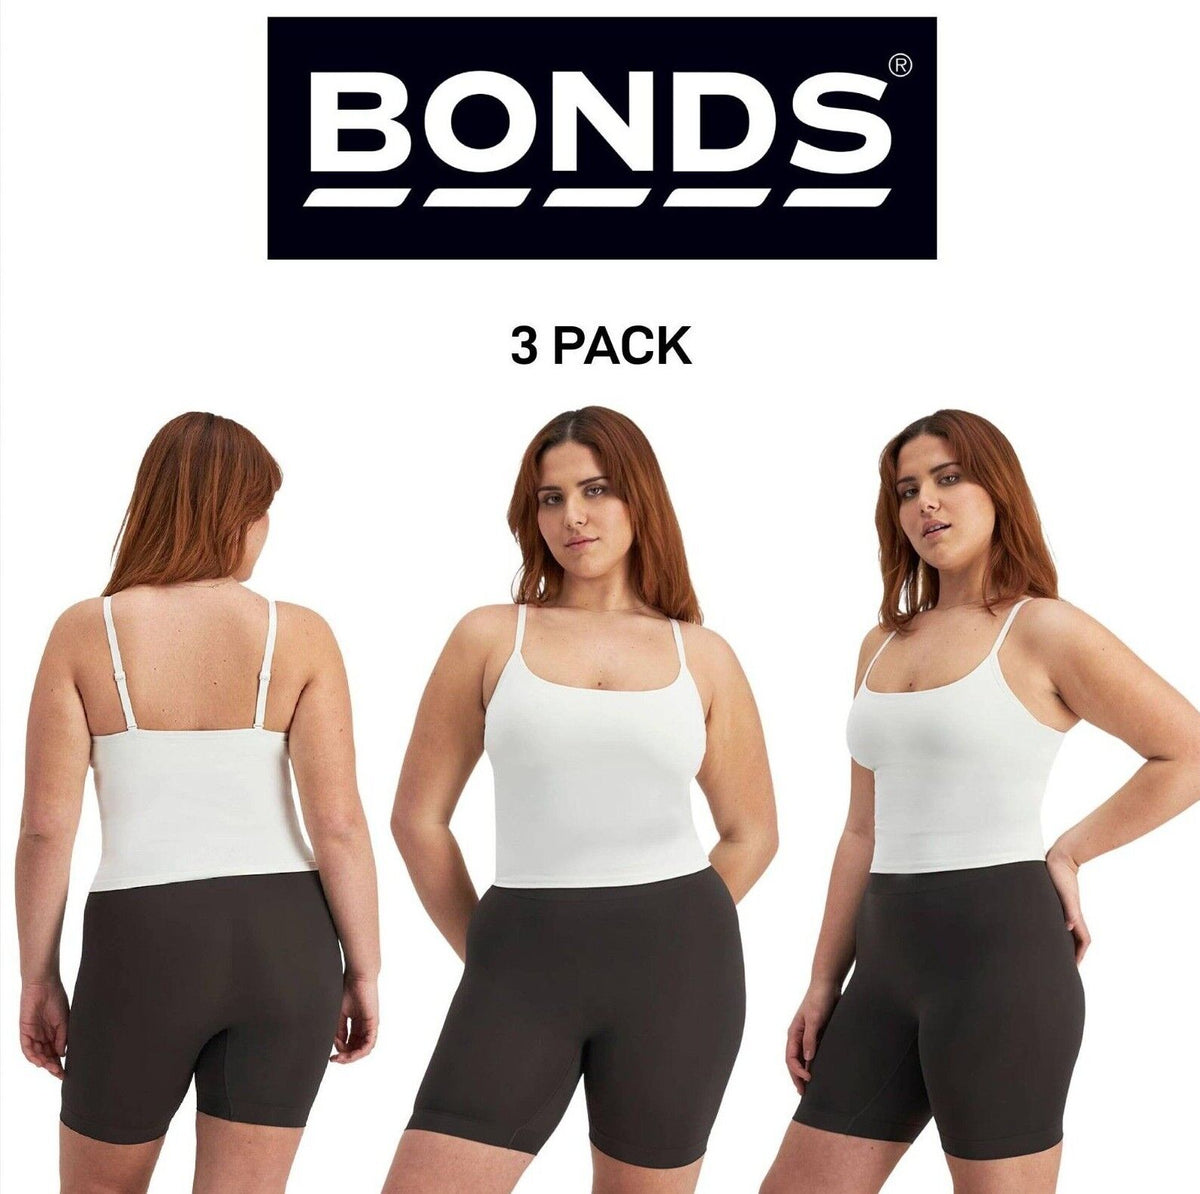 Bonds Womens Bases Seamless Singlet Buttery Smooth and Lightweight 3 Pack WR7Q